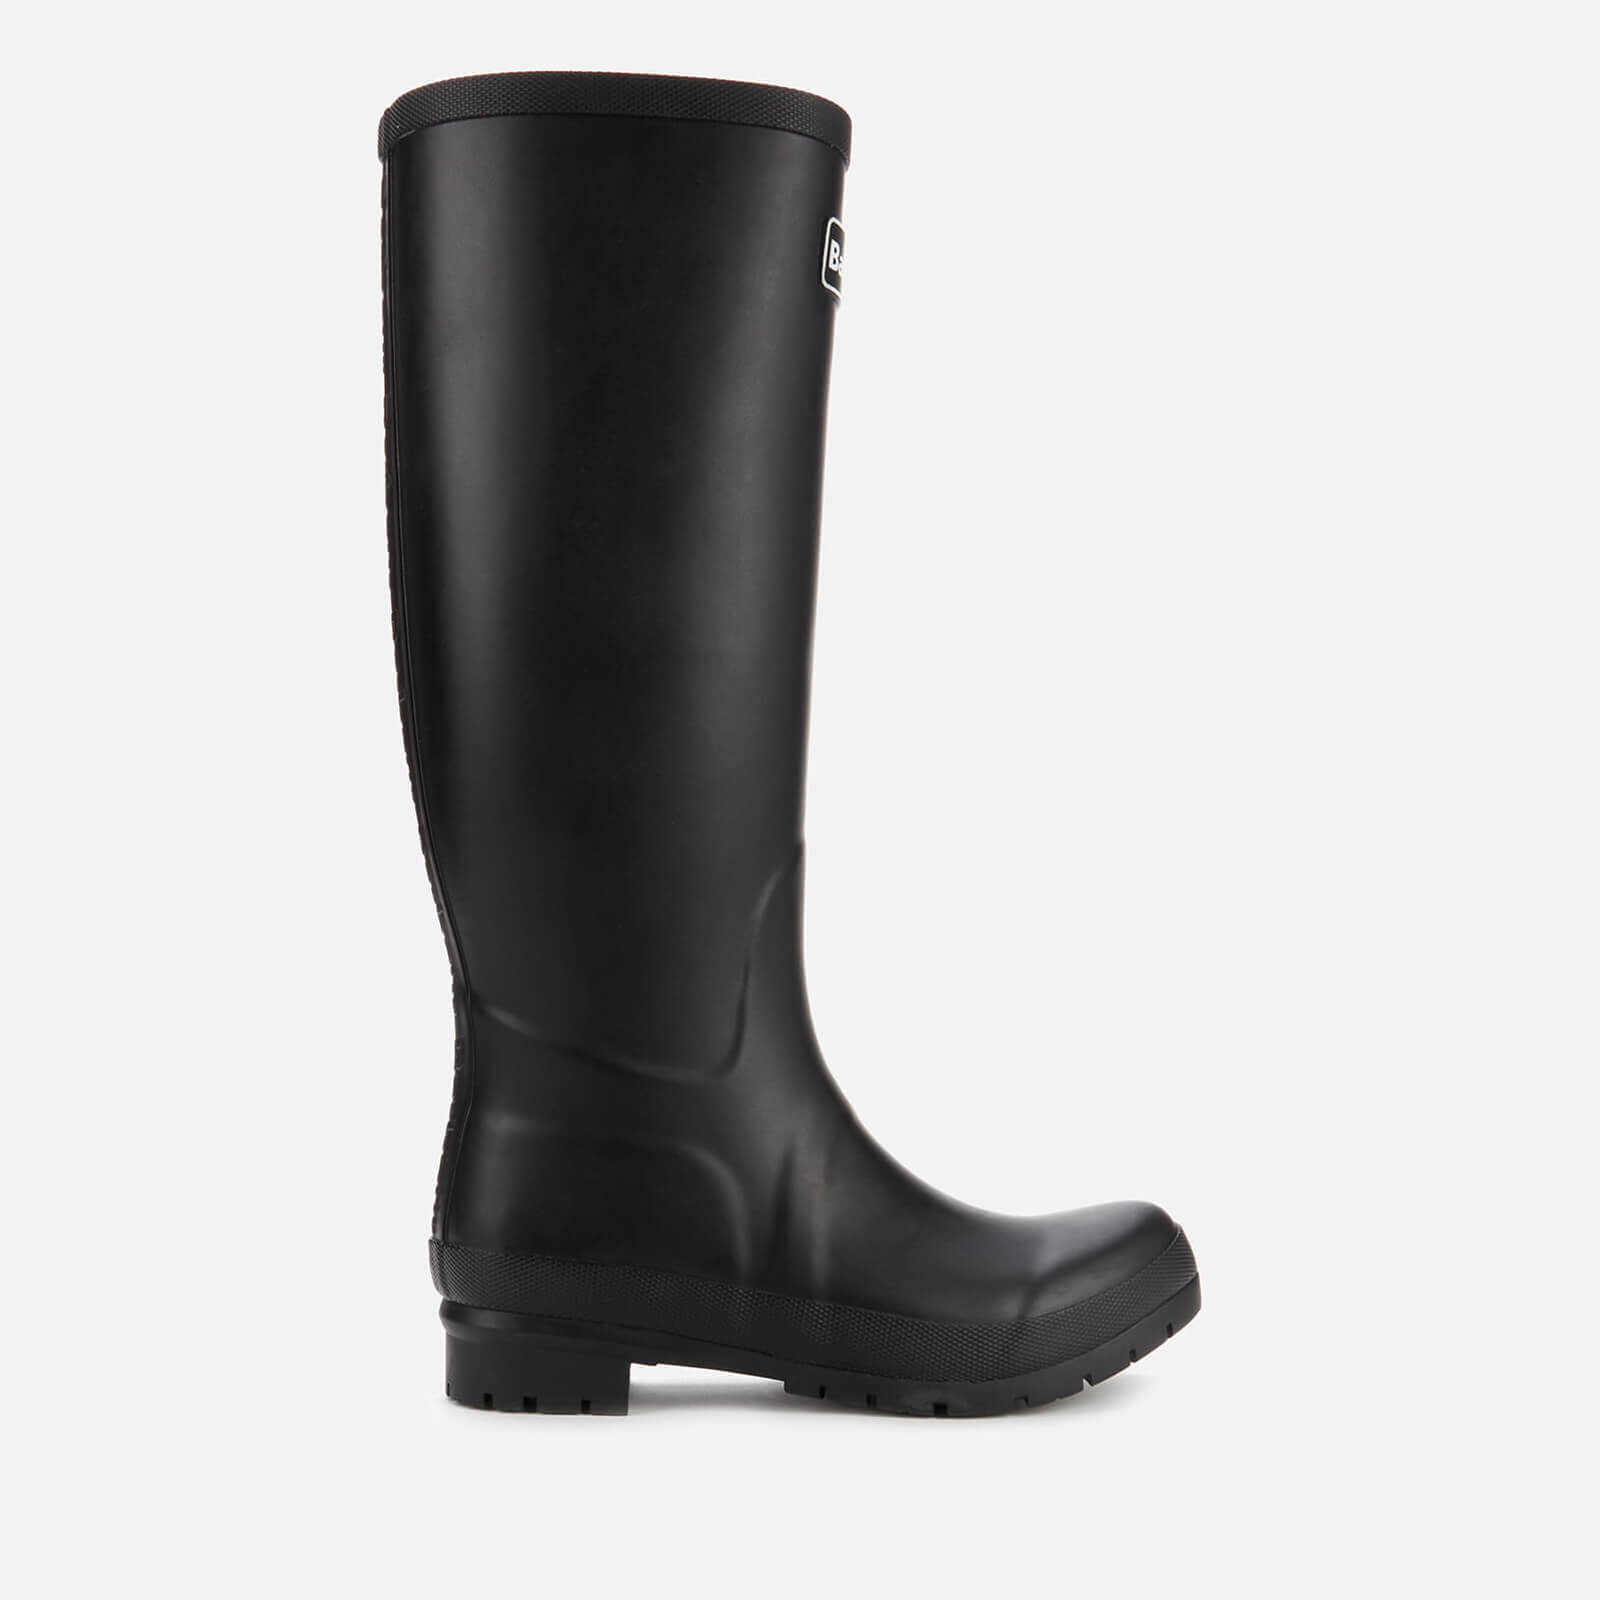 Barbour Women's Abbey Tall Wellies - Black - UK 4 product